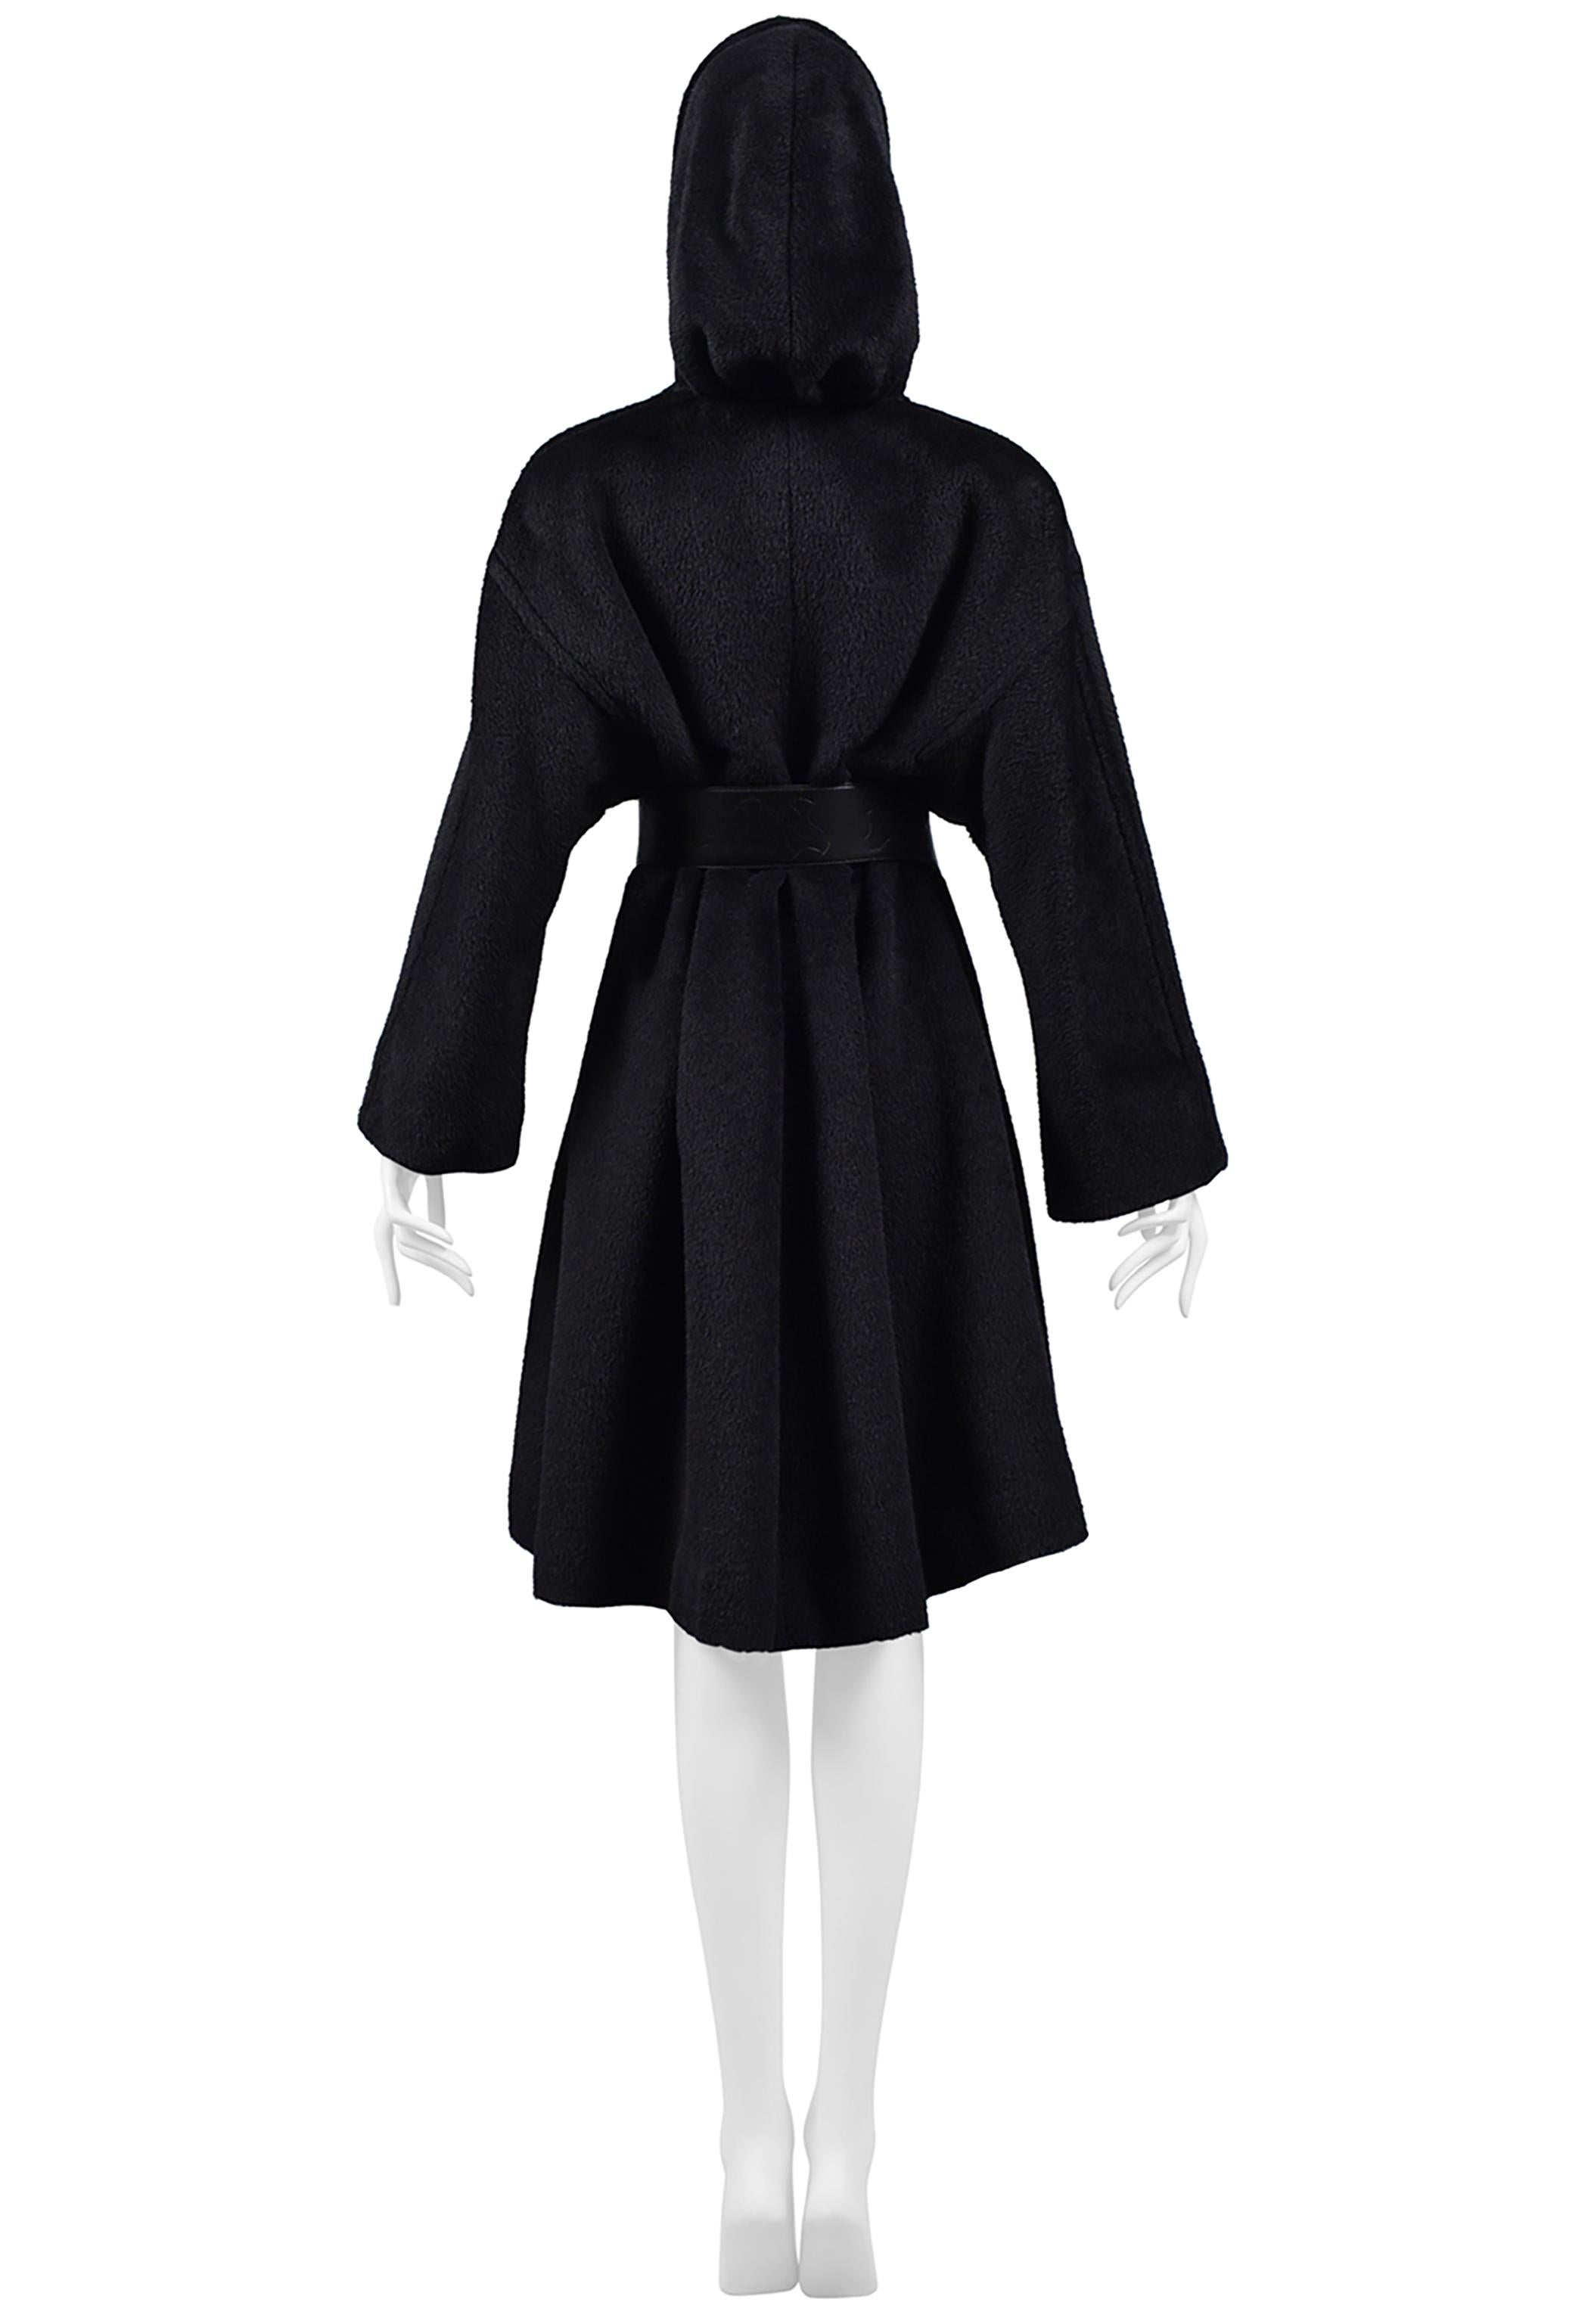 Thierry Mugler Black Alpaca Hooded Cape Coat For Sale 2